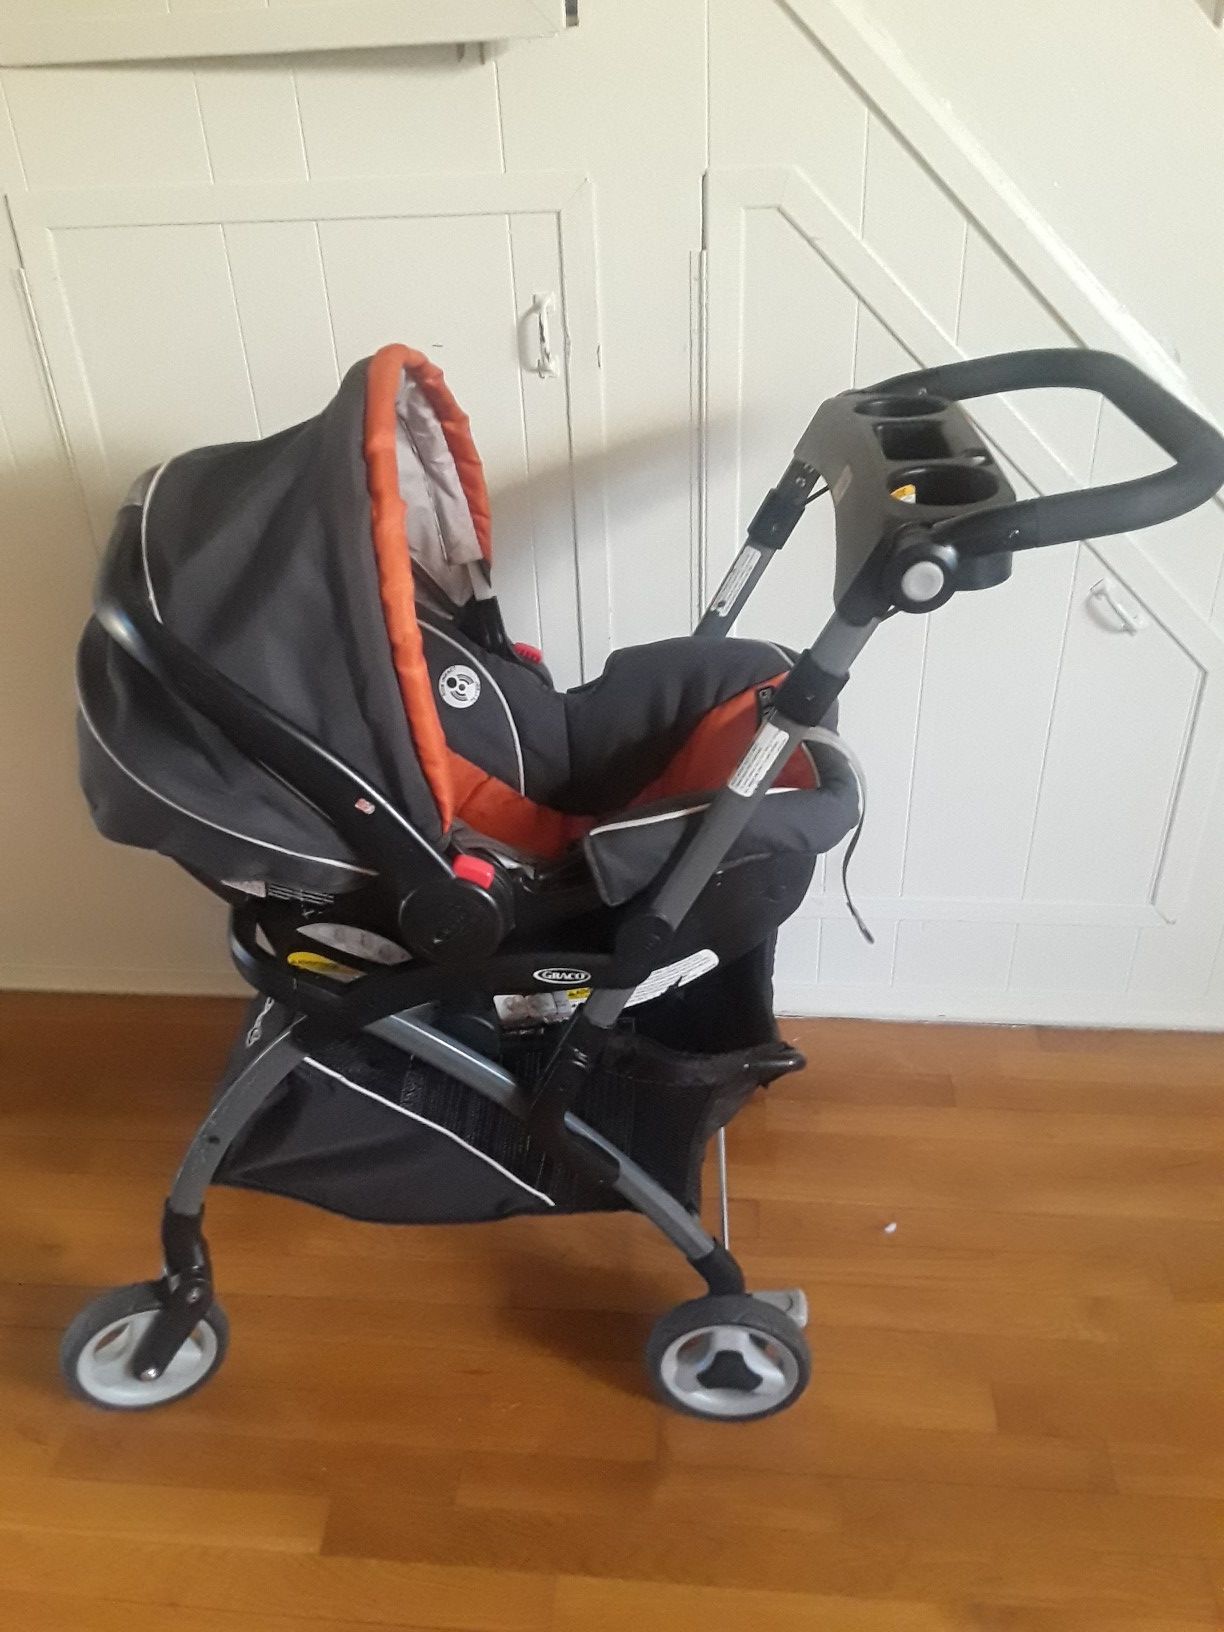 Graco car seat with stroller frame